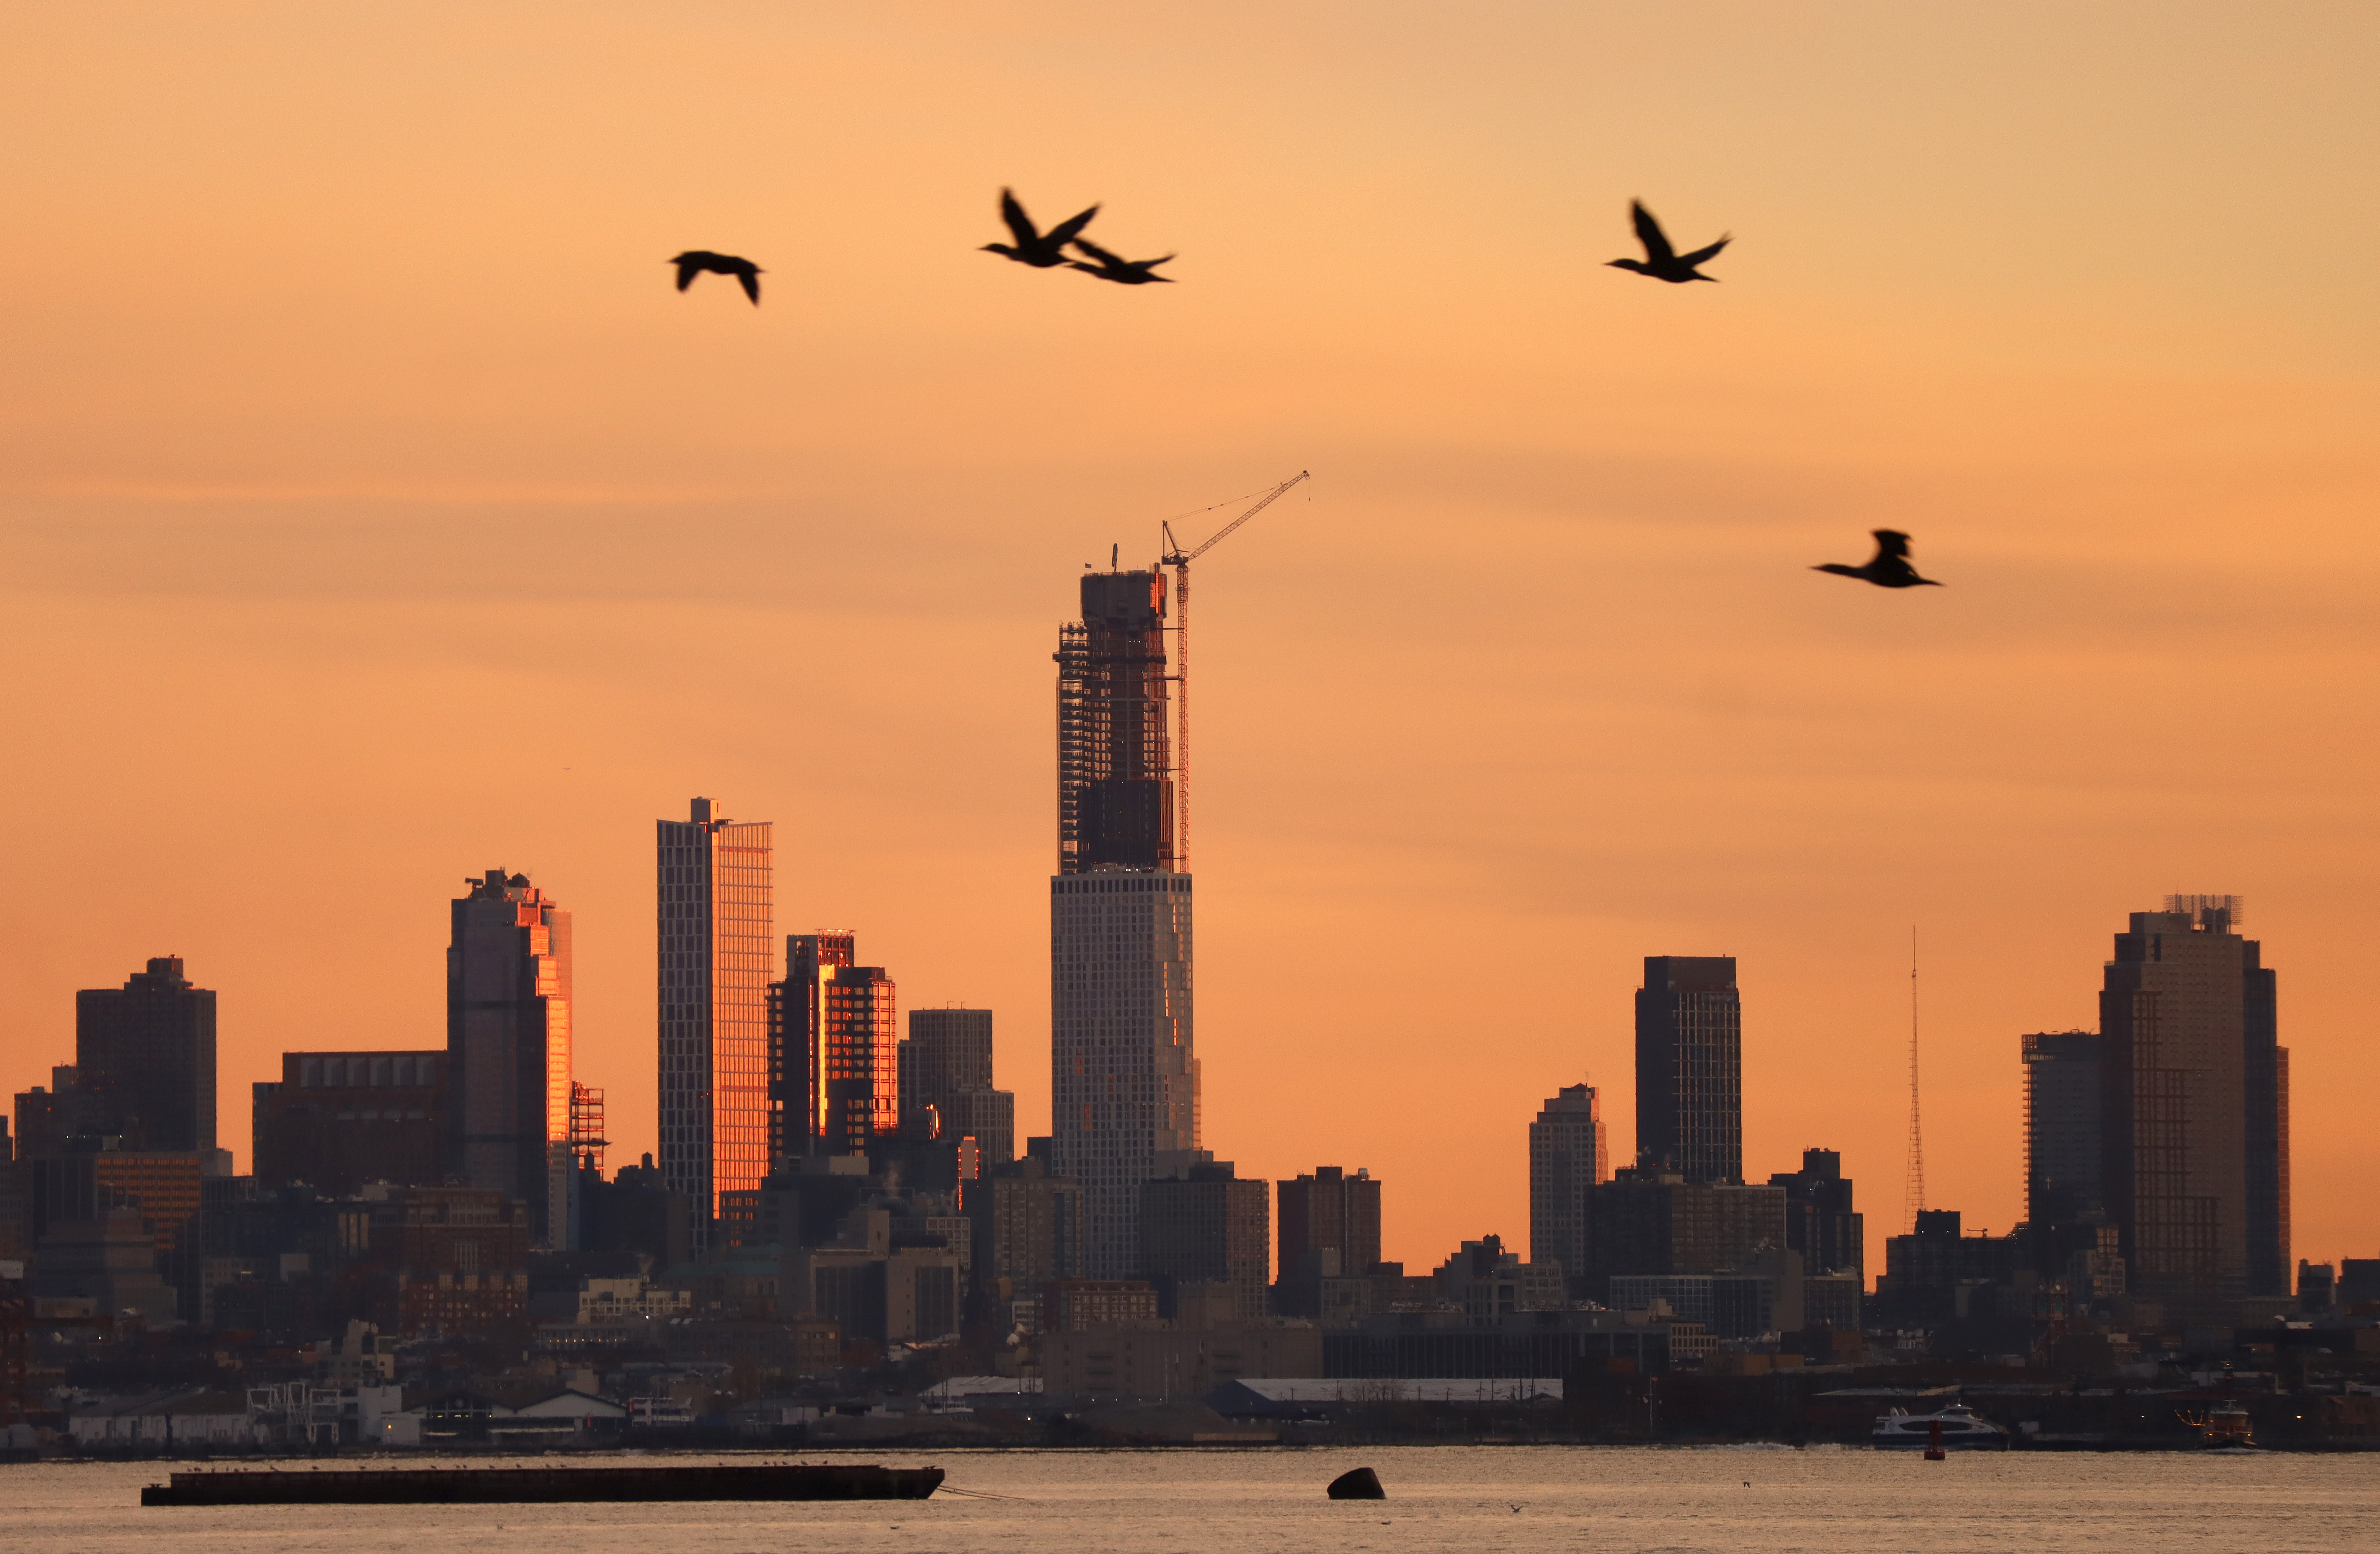 The sun rises behind the skyline of Brooklyn and the Brooklyn Tower in New York City as geese fly past.